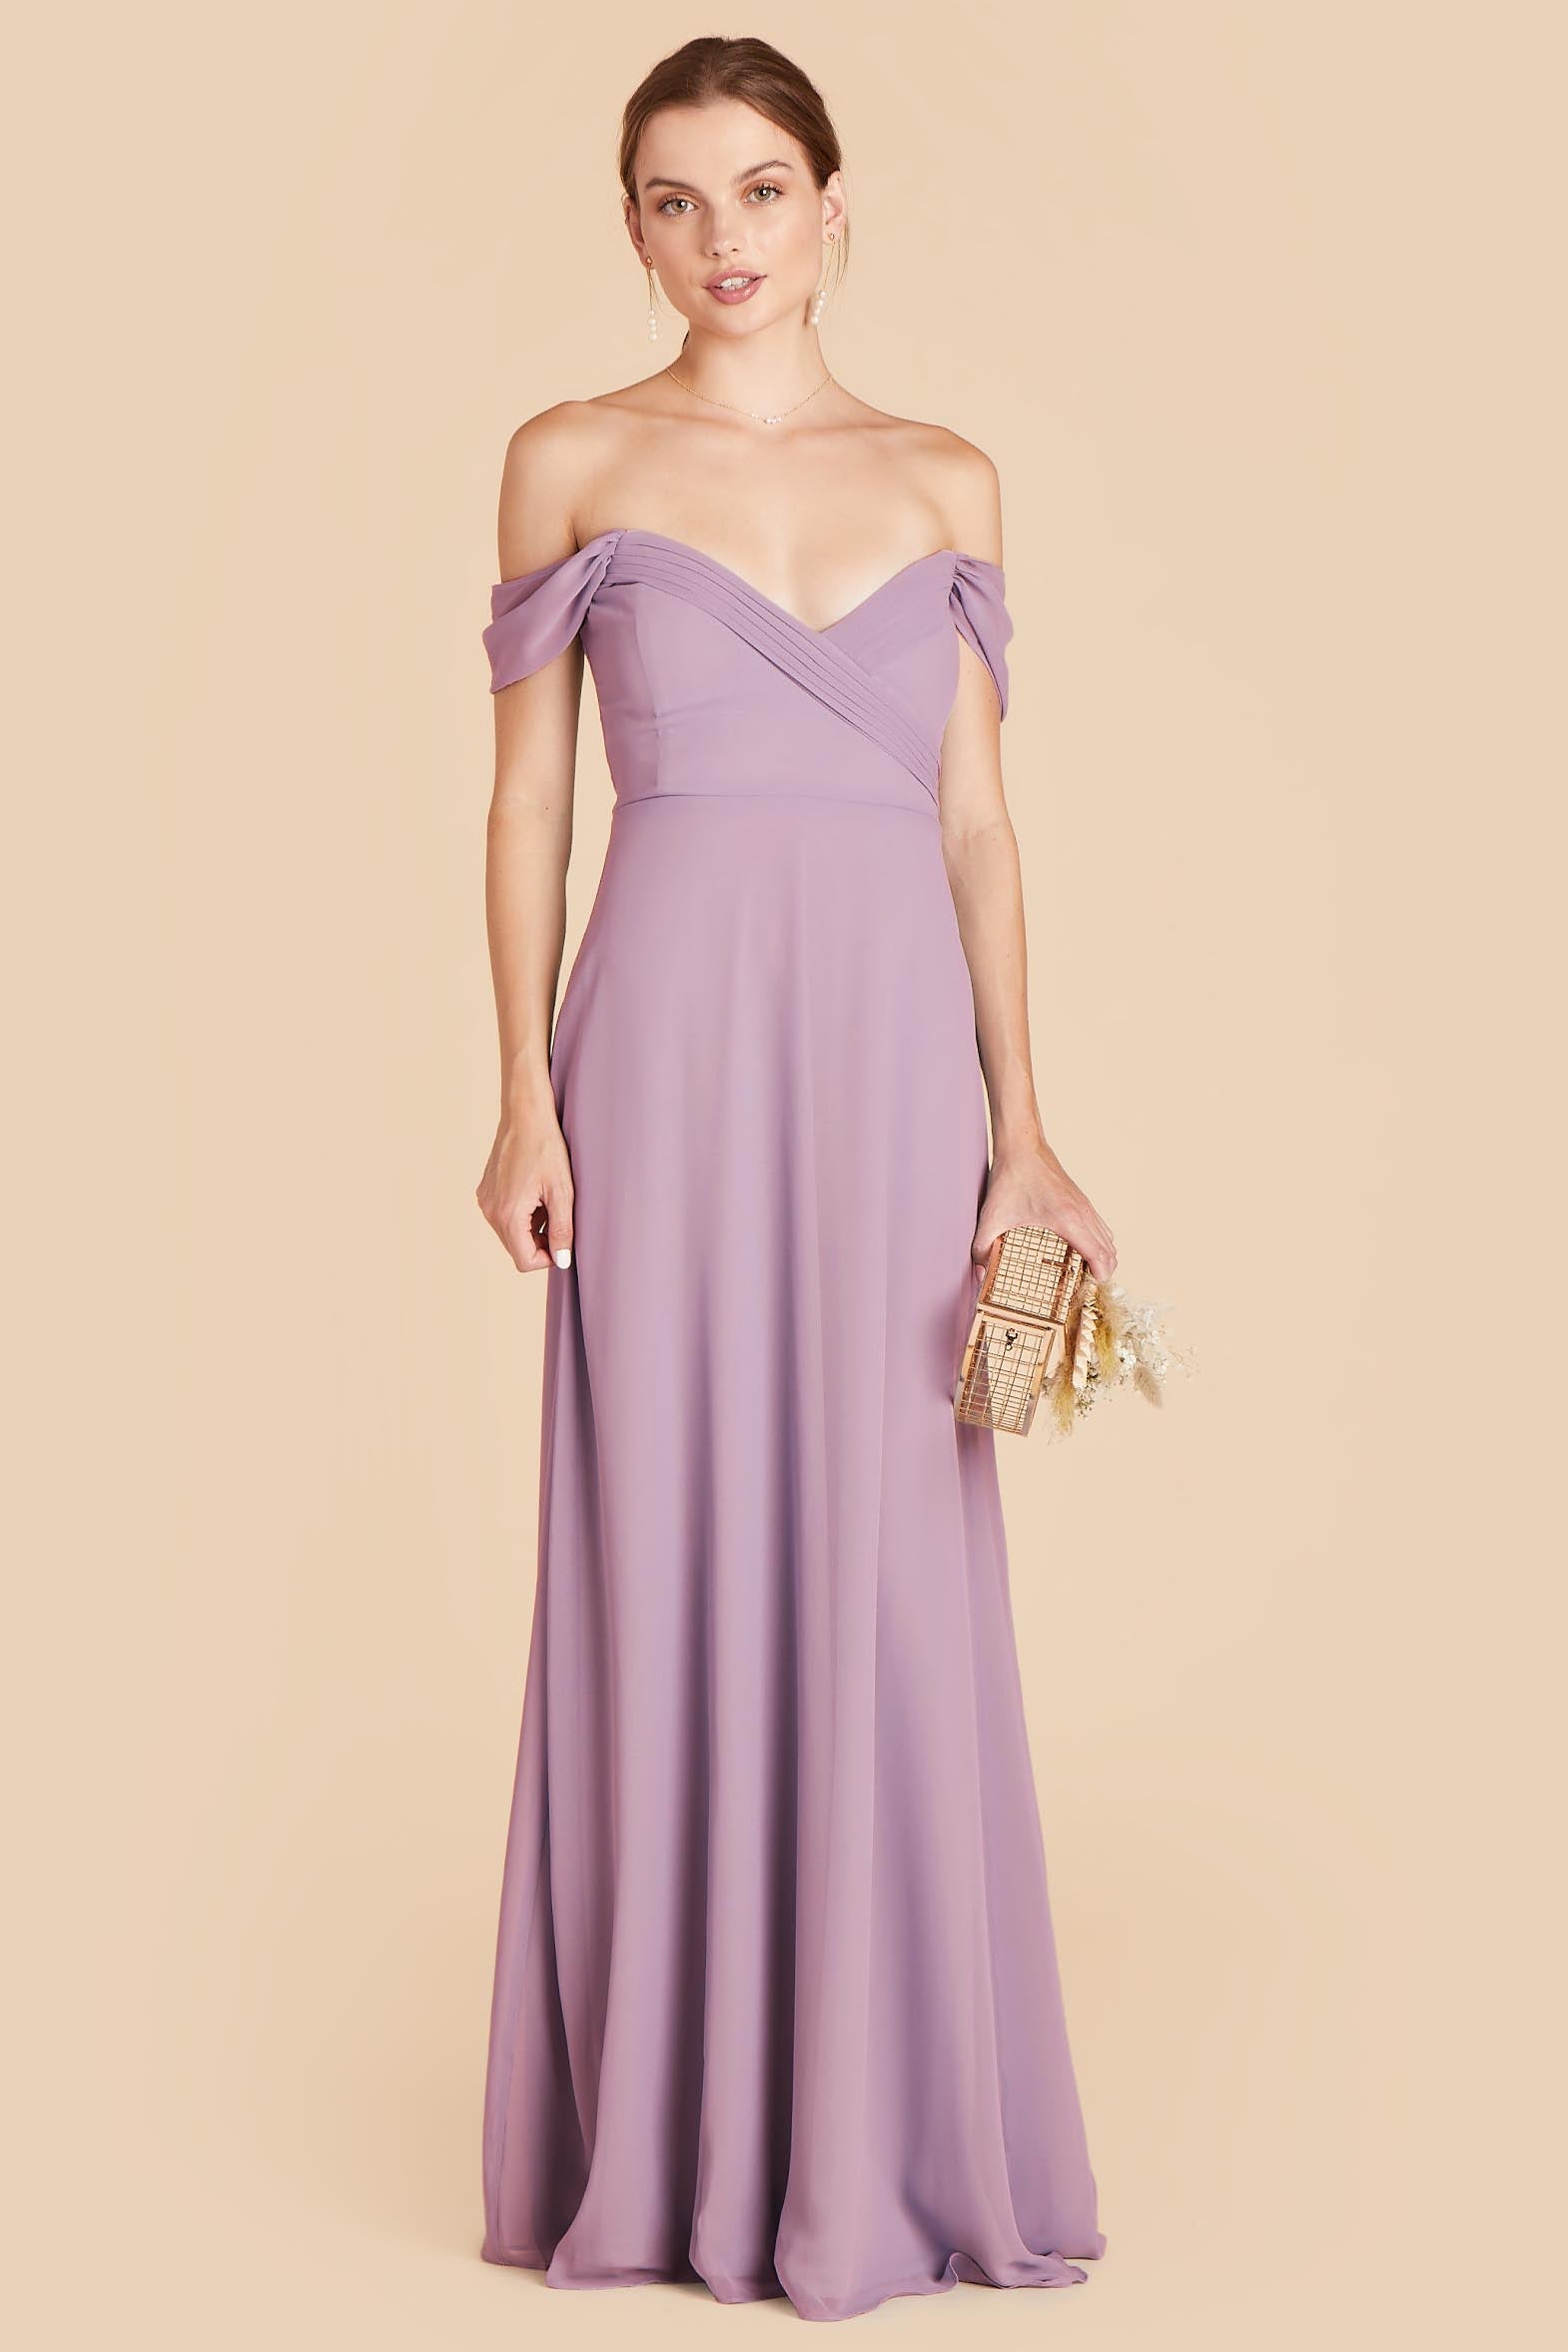 Lavender Spence Convertible Dress by Birdy Grey